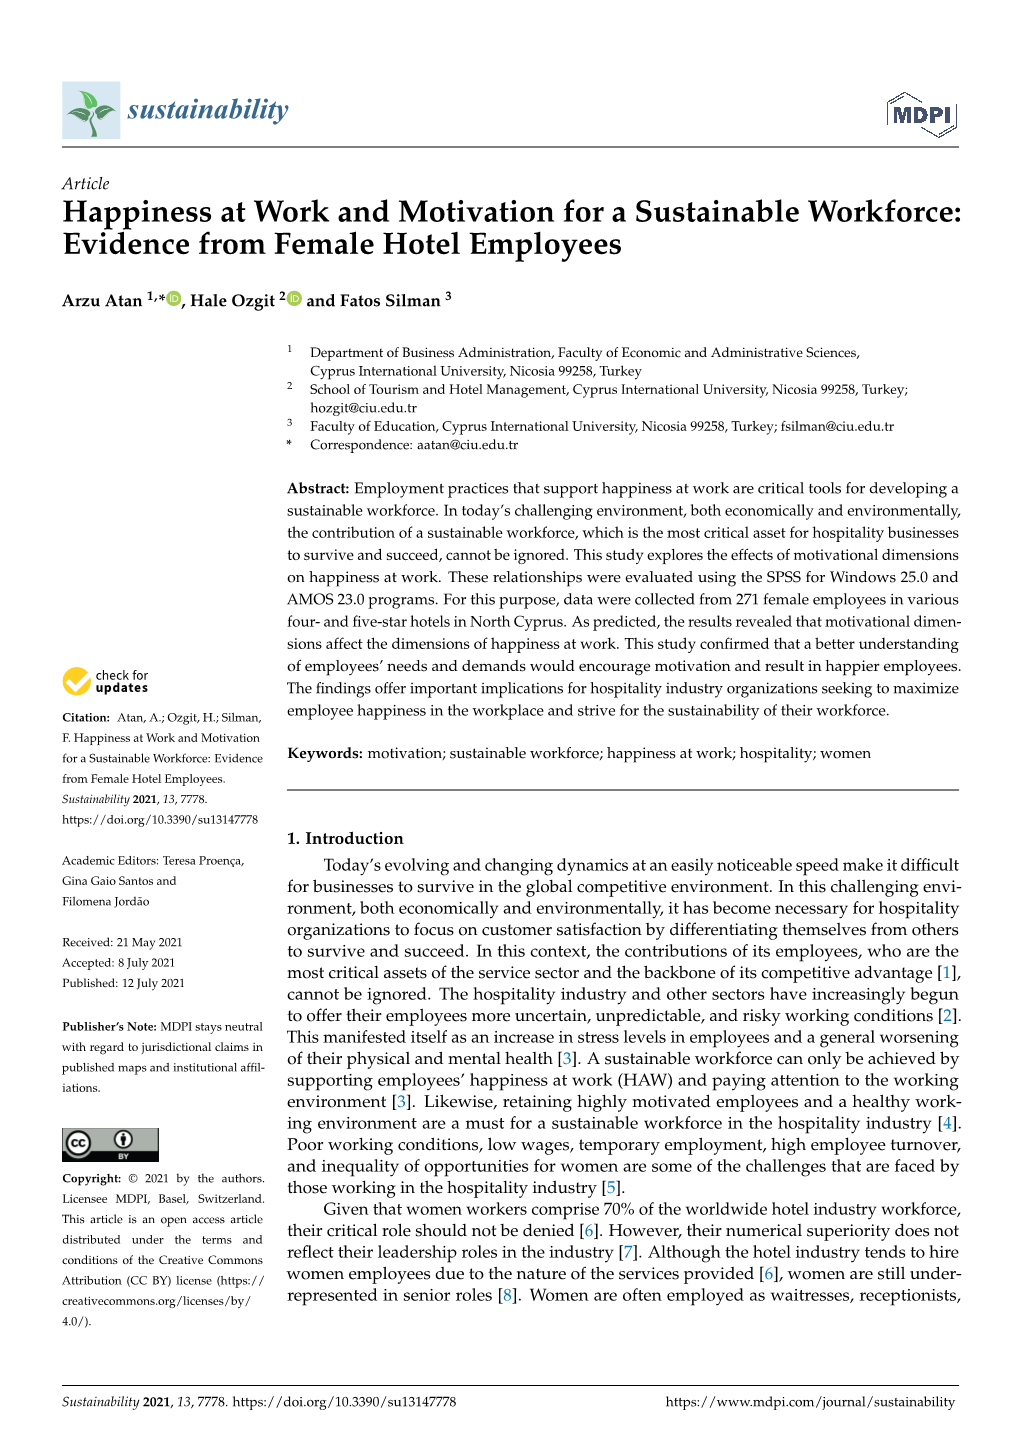 Happiness at Work and Motivation for a Sustainable Workforce: Evidence from Female Hotel Employees